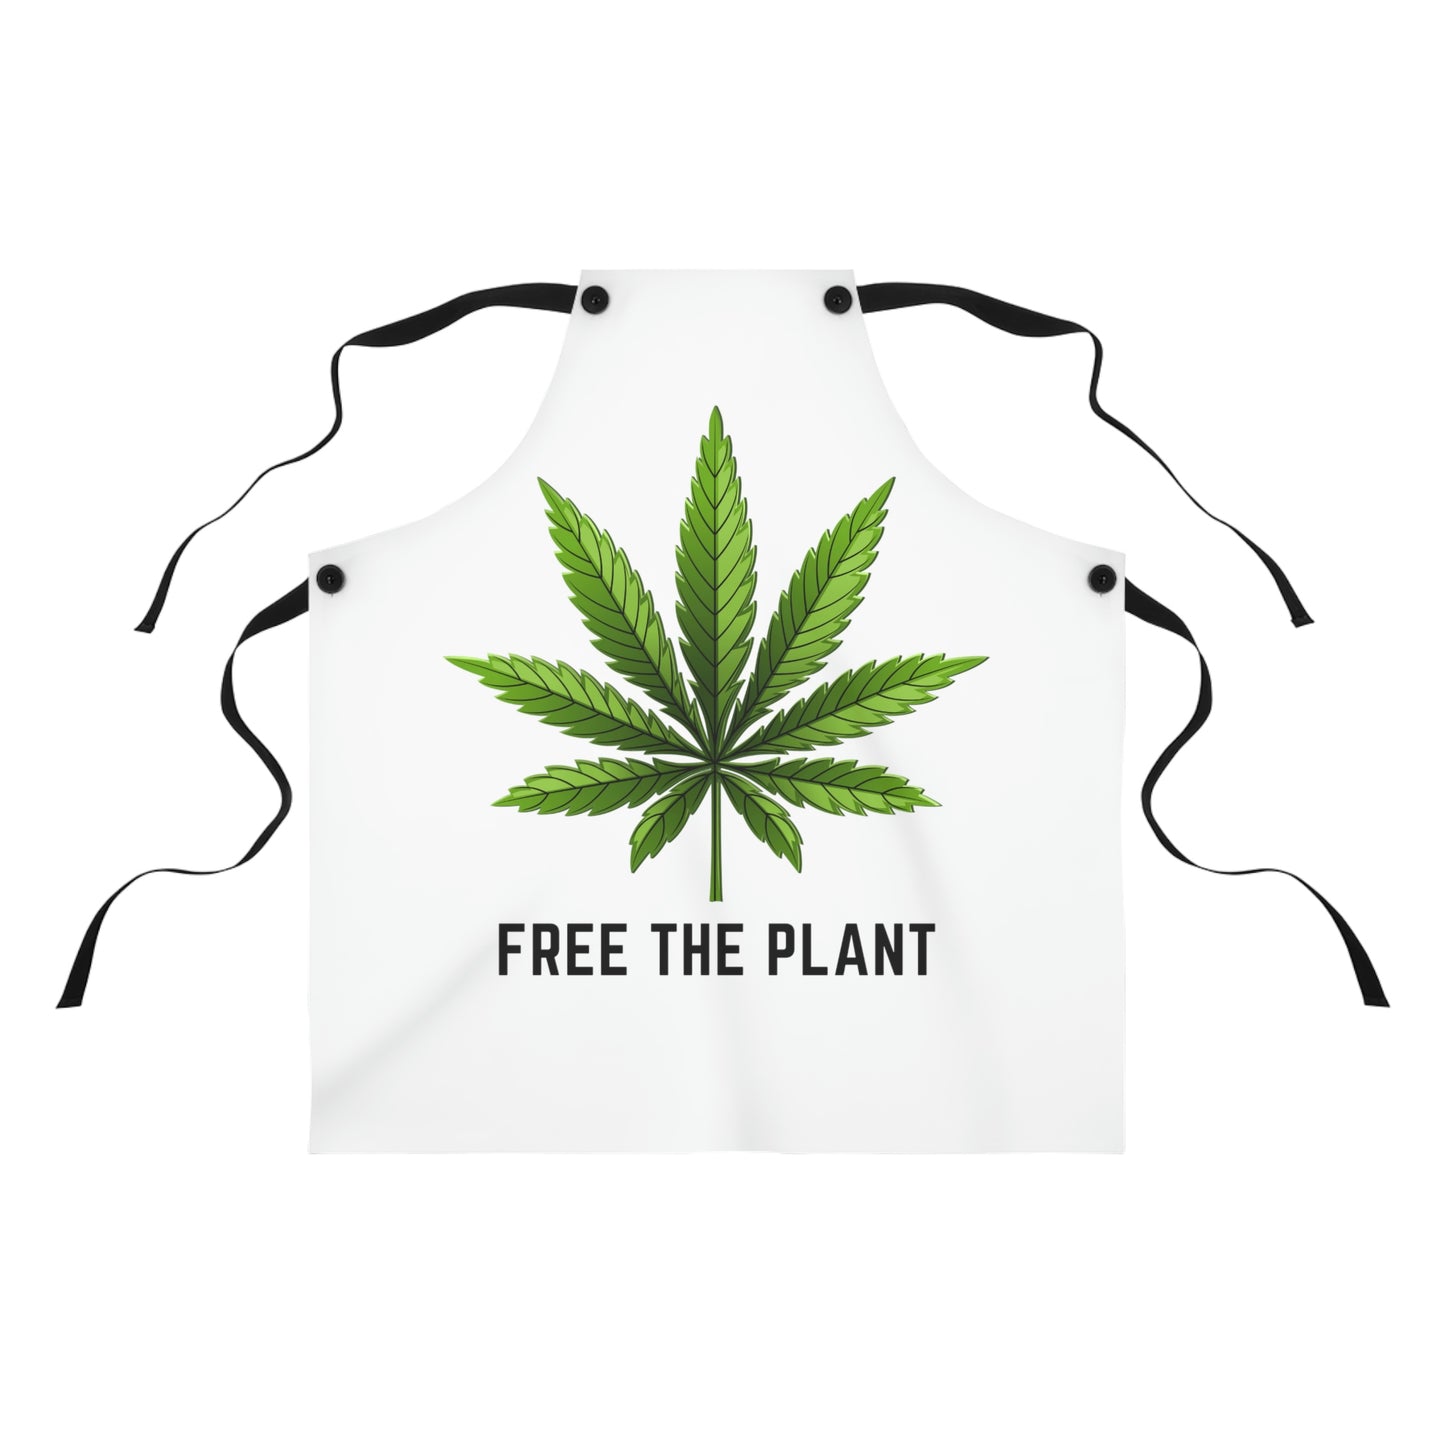 Free the Plant Weed Chef's Apron.